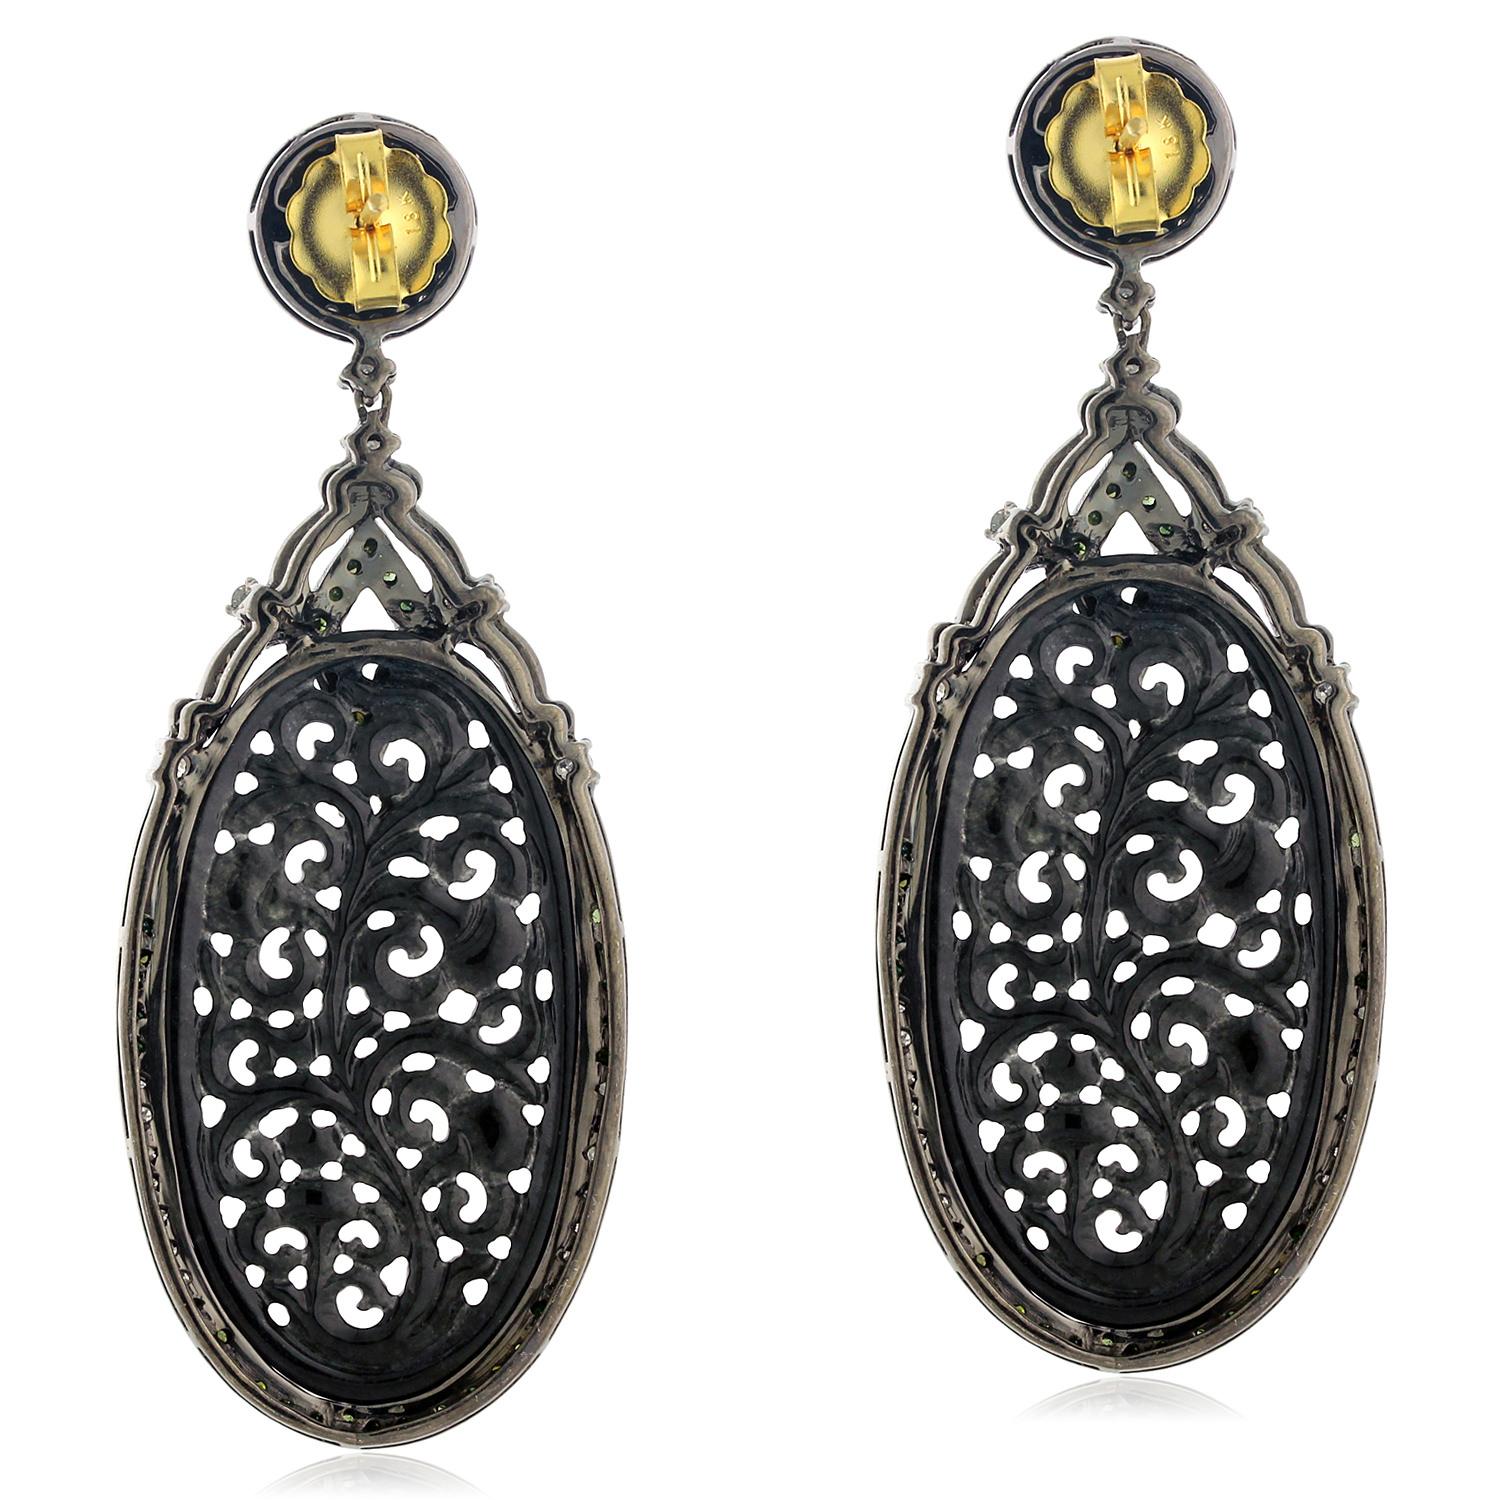 Black and Beautiful this hand carved jade earring is adorned by white and blue diamonds around.

Closure: Push Post

18kt: 1.76gms
Diamond: 3.87cts
silver: 13.83gms
Jade:35.45ct